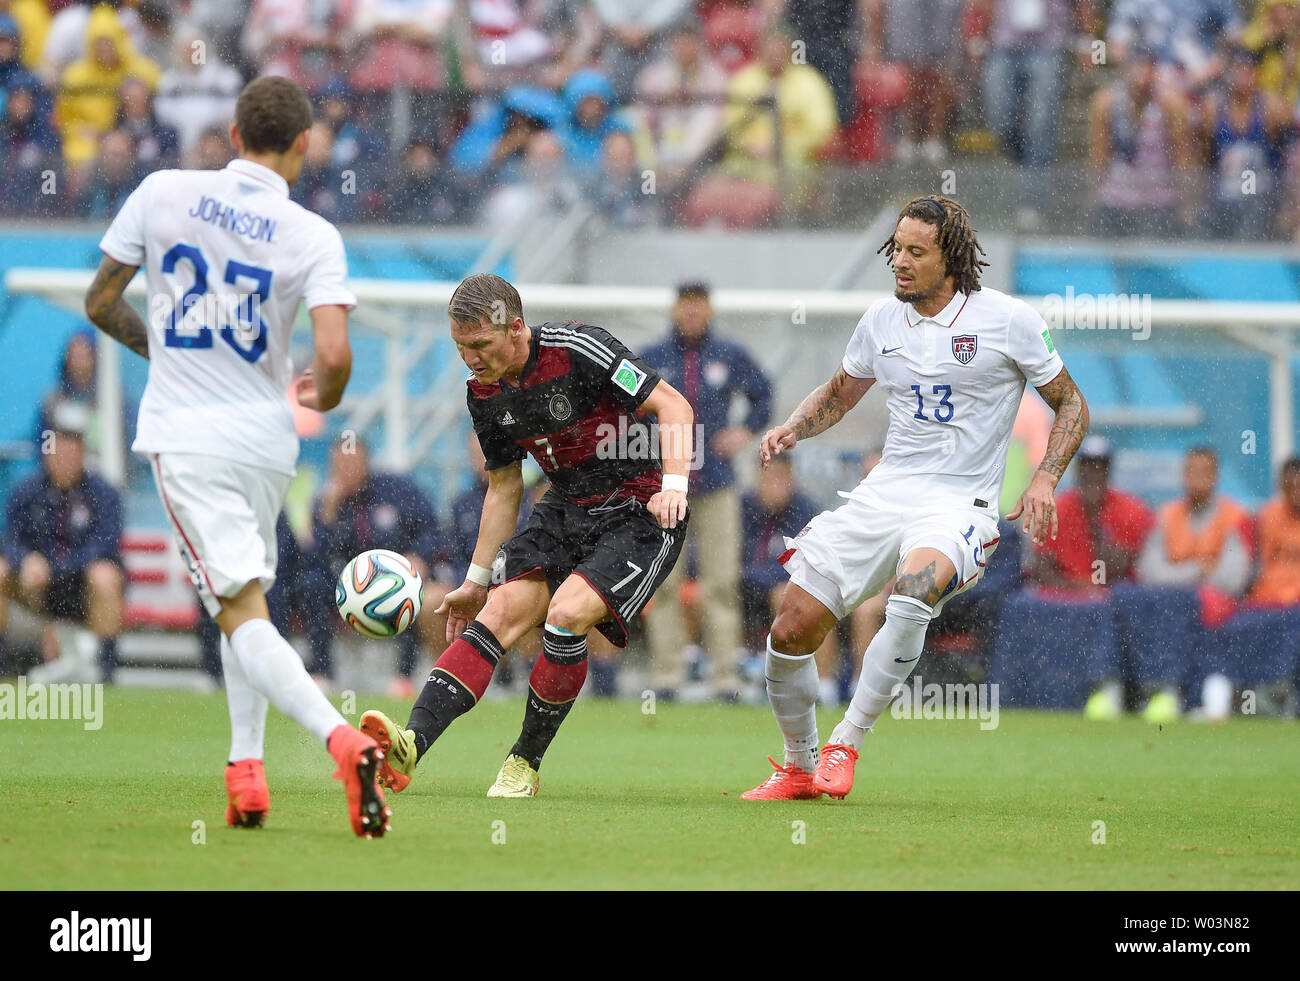 Jermaine Jones of USA competes with Bastian Schweinsteiger (L) of Germany during the 2014 FIFA World Cup Group G match at the Arena Pernambuco in Recife, Brazil on June 26, 2014. UPI/Chris Brunskill Stock Photo